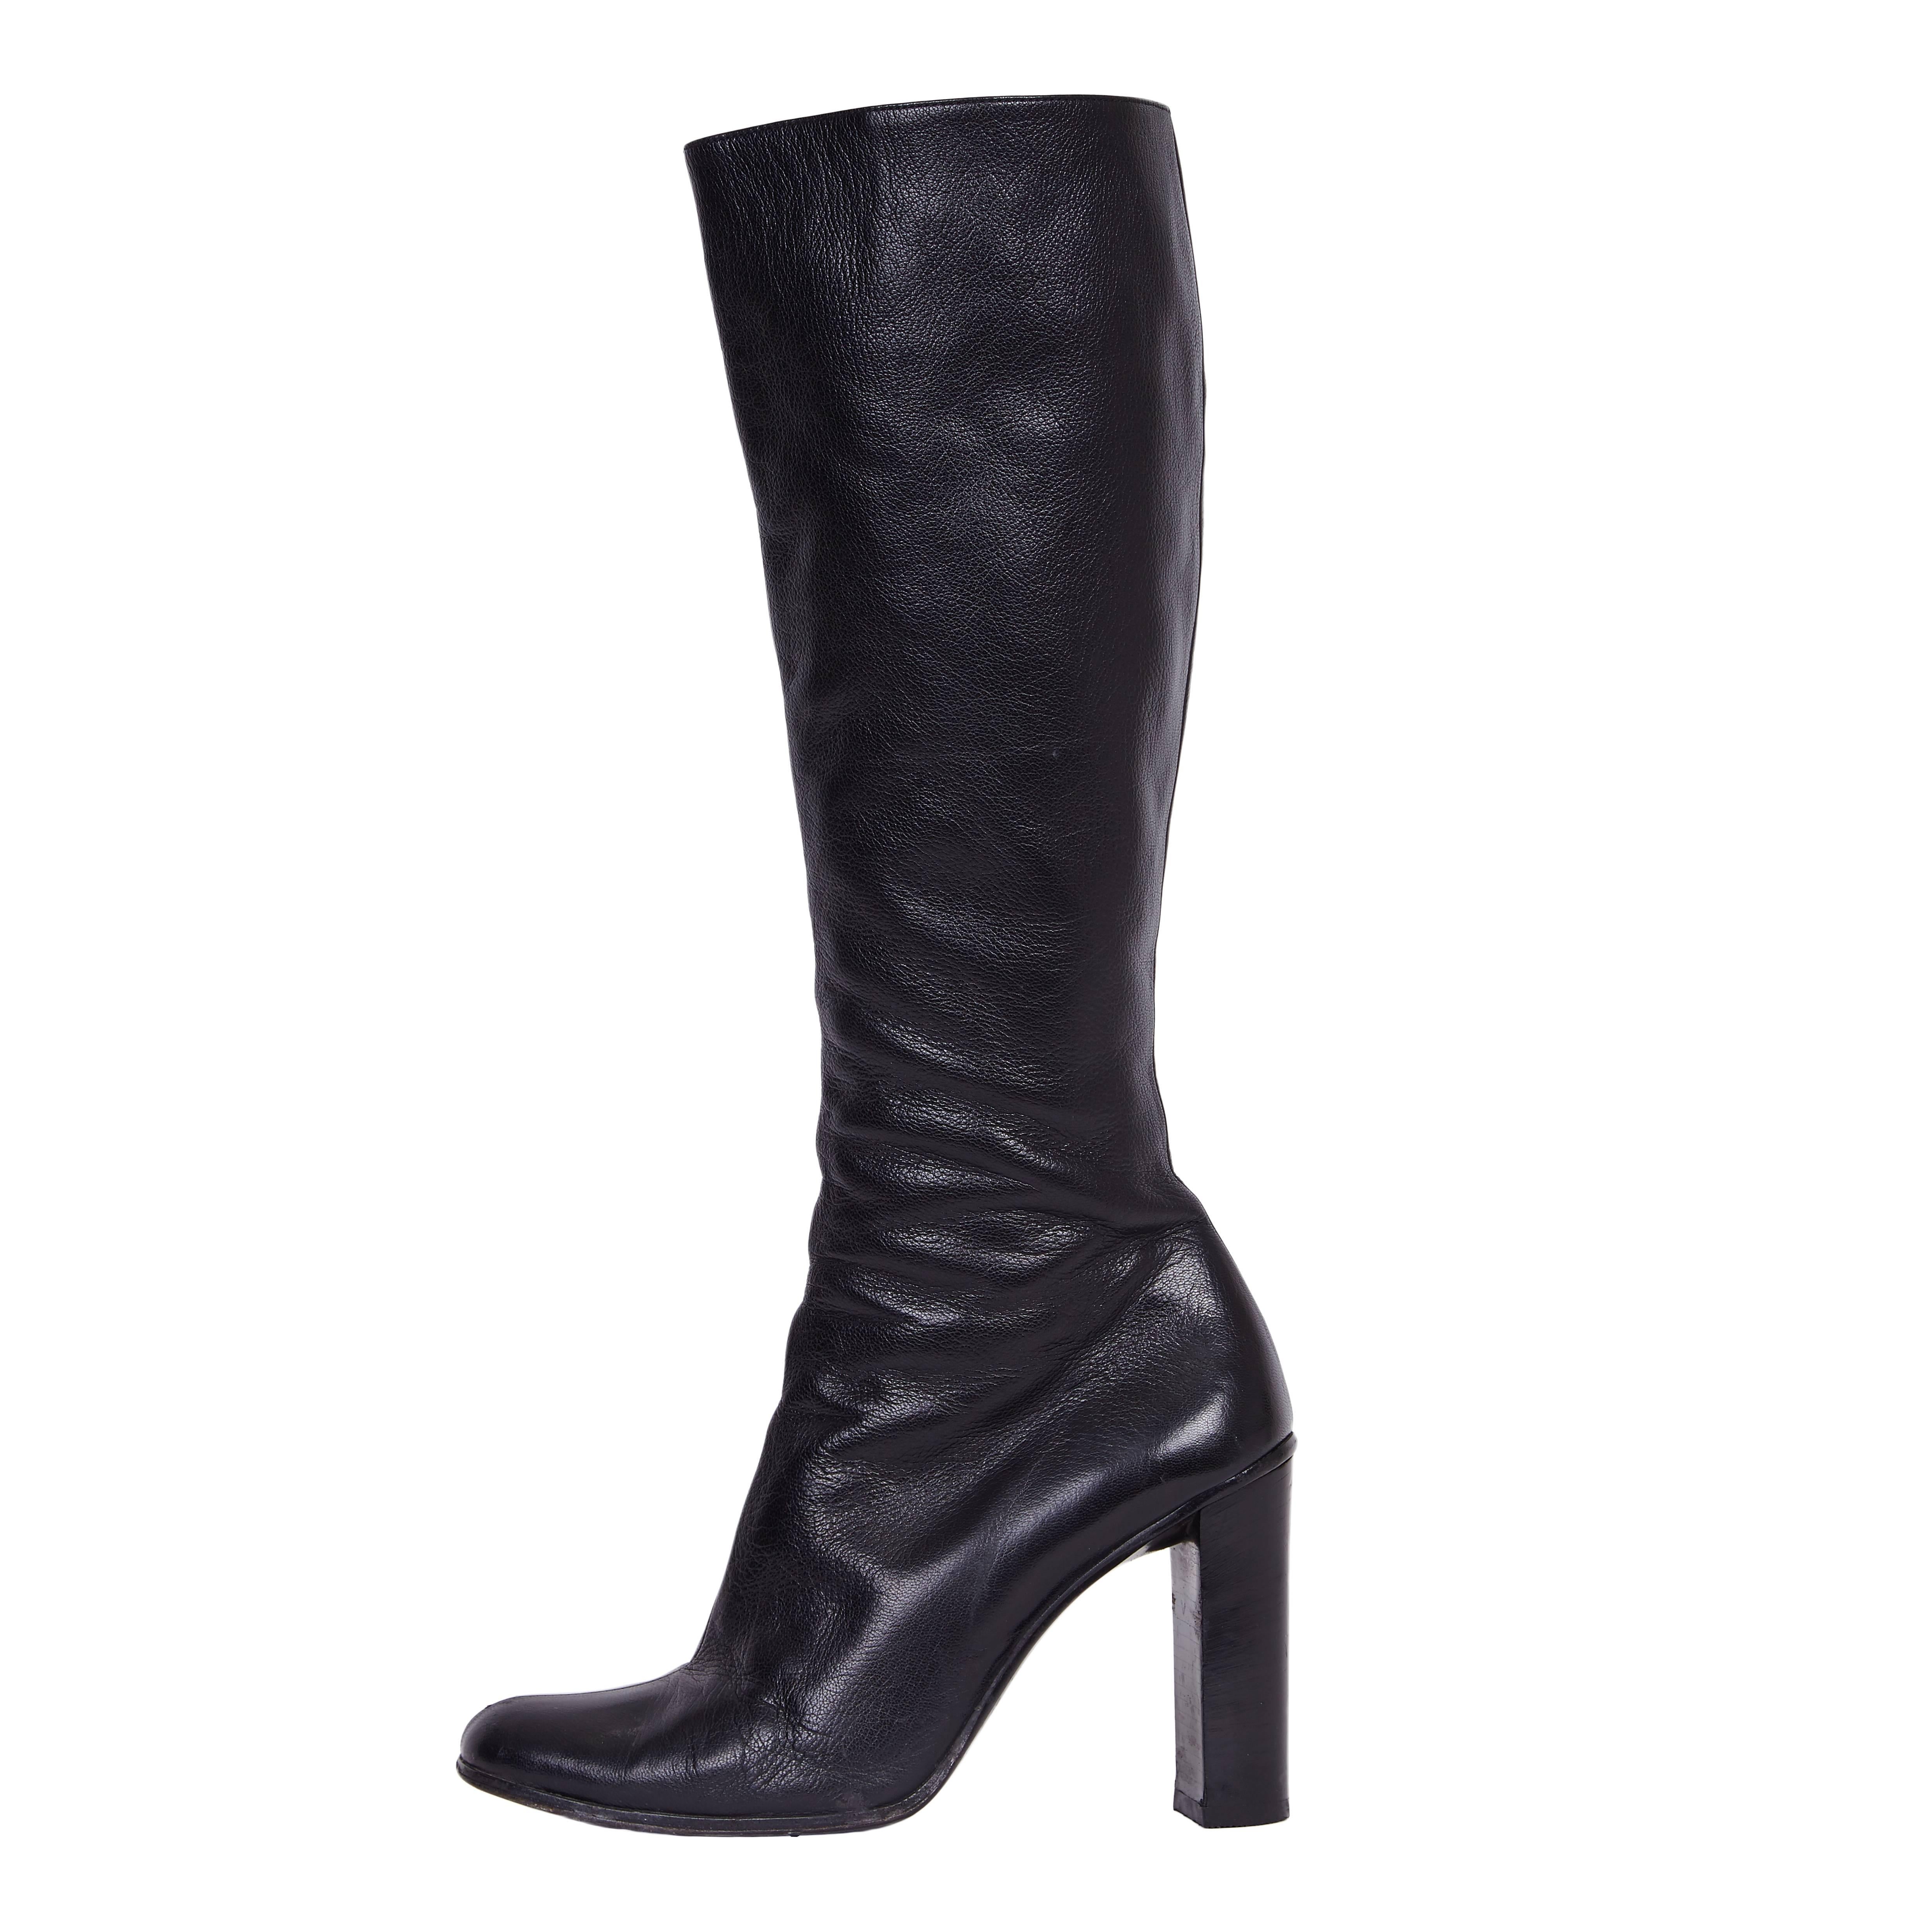 Exude the cosmopolitan appeal of Tom Ford’s Gucci with this pair of knee-high leather boots, circa 1999. In a sleek silhouette, these Gucci boots are crafted in black leather, finished with a block heel, side zipper and a prominent monogram in